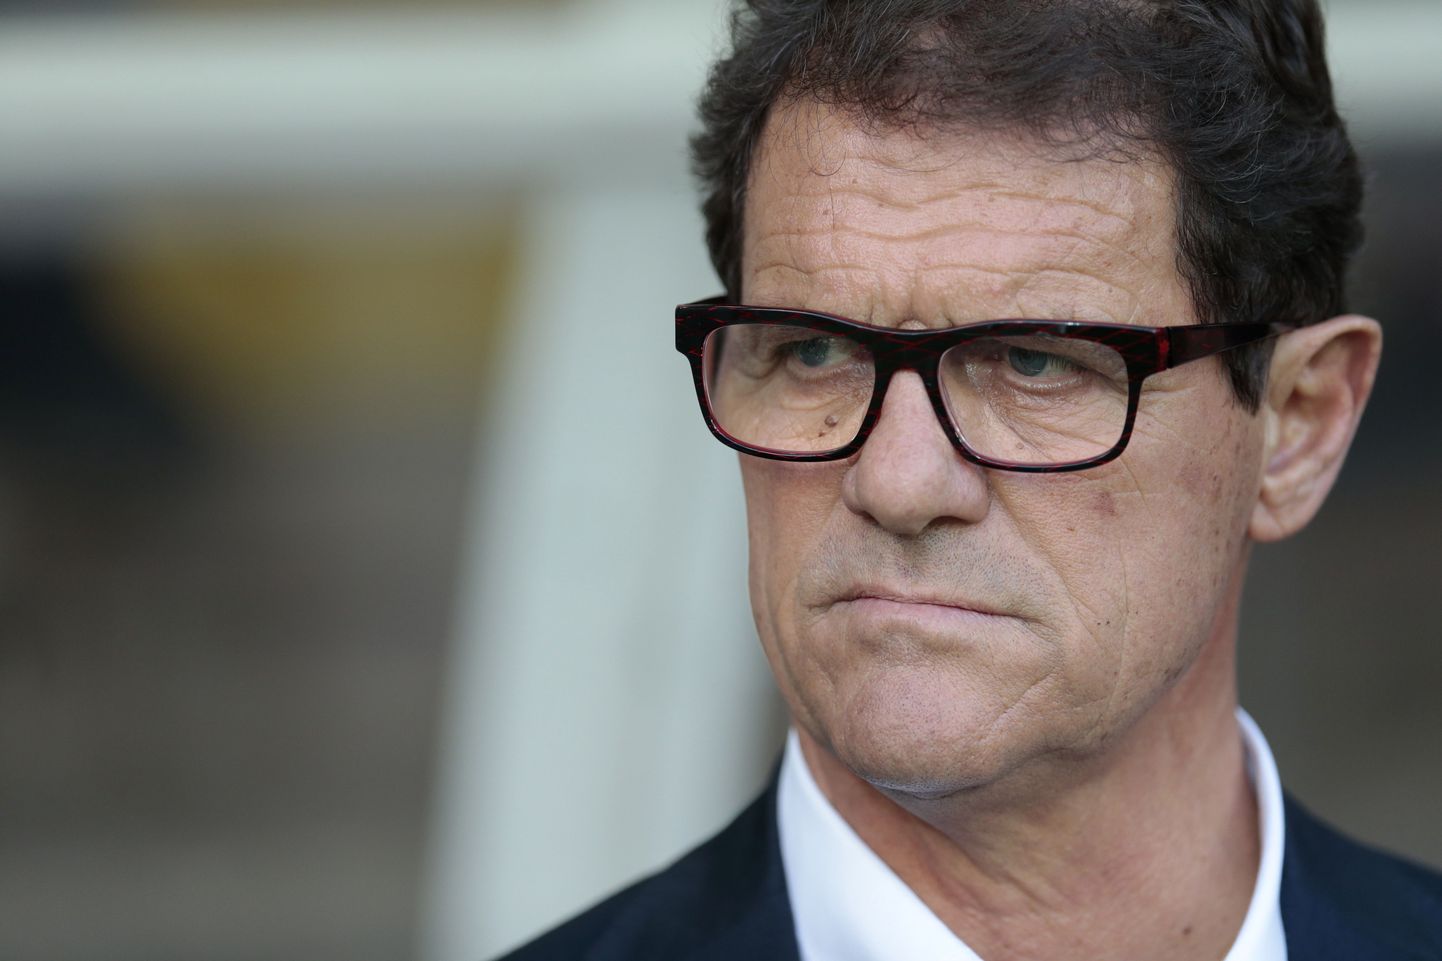 FILE - In this June  14, 2015 file photo, Russias coach Fabio Capello watches his players during the Euro 2016 qualifying soccer match between Russia and Austria, in Moscow, Russia. The Russian Football Union says national team coach Capello has resigned following a dispute over back pay. In a statement released Monday, July 13, 2015, the Russian Football Union did not disclose the financial terms of the settlement but expressed gratitude to Capello for his work. (AP Photo/Ivan Sekretarev, file)